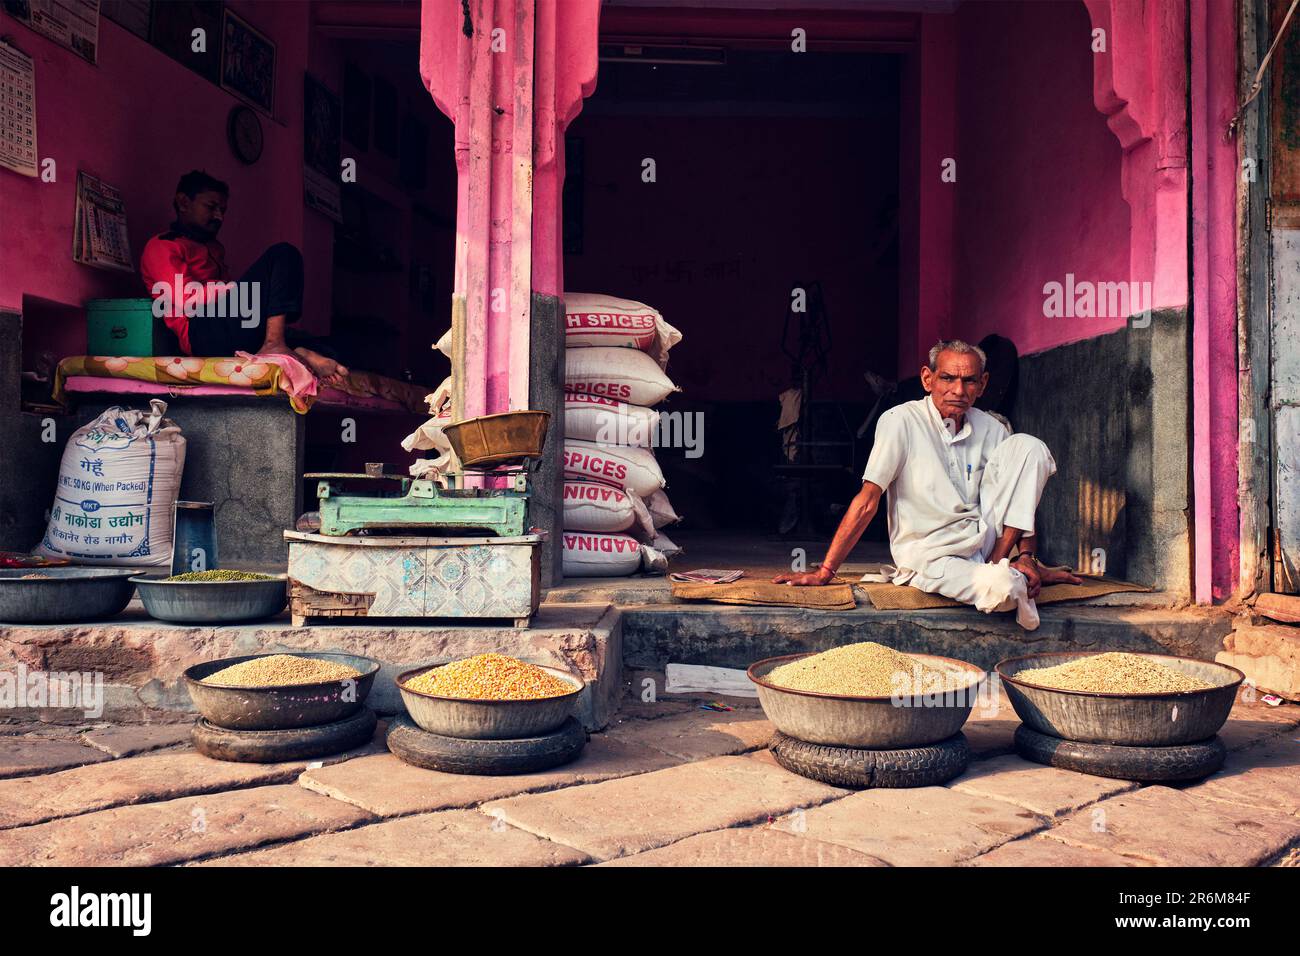 Vendors in legumes and spices shop. Jodhpur, Rajasthan, India Stock Photo